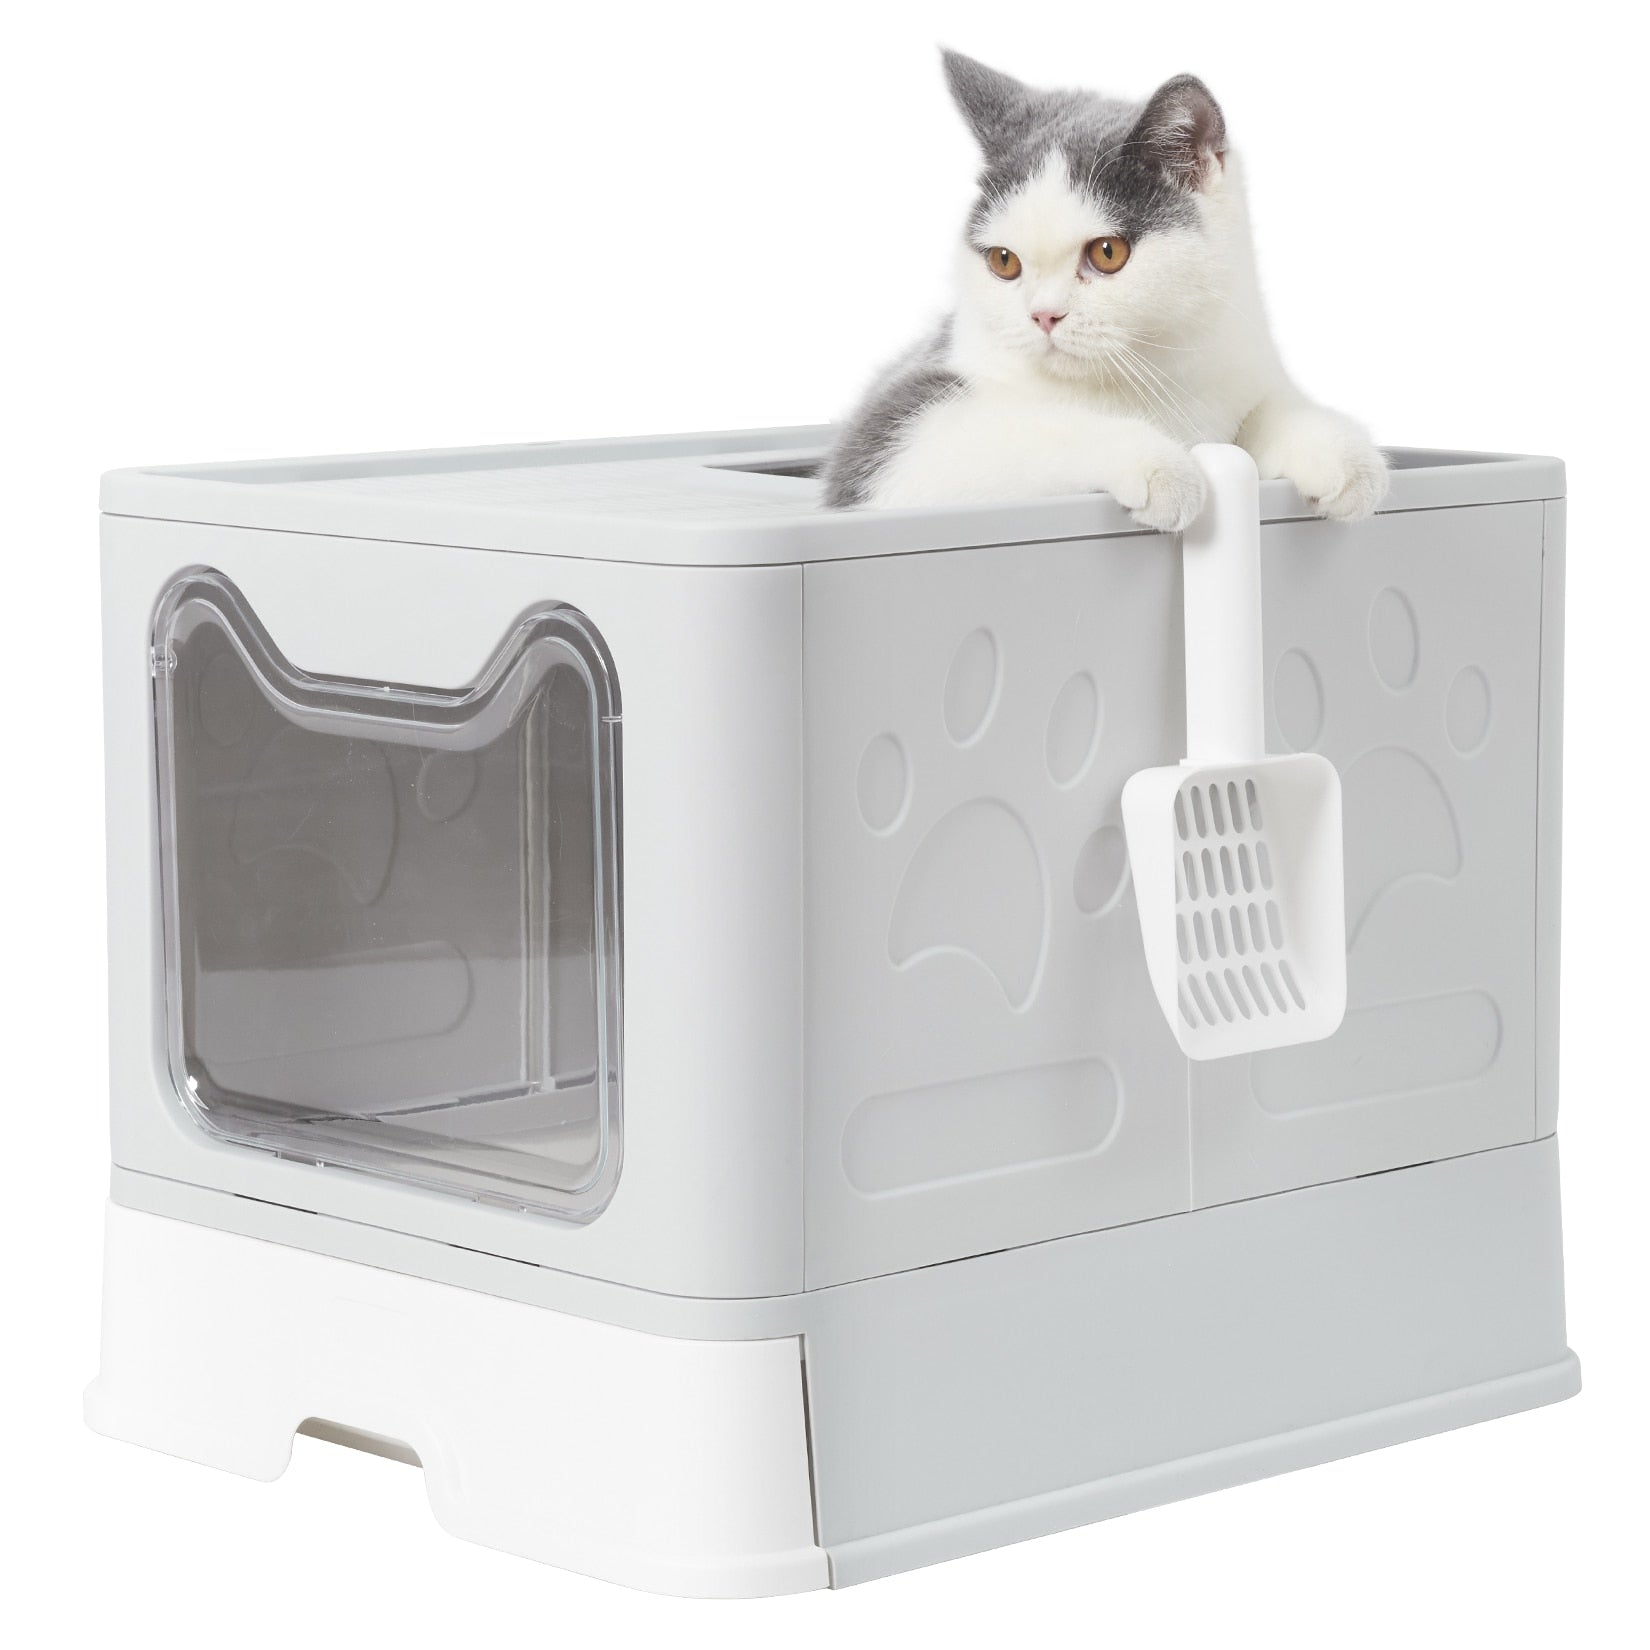 (Out of Stock) Top Entry Foldable Cat Litter Box Cats Toilet with Cat Litter Scoop